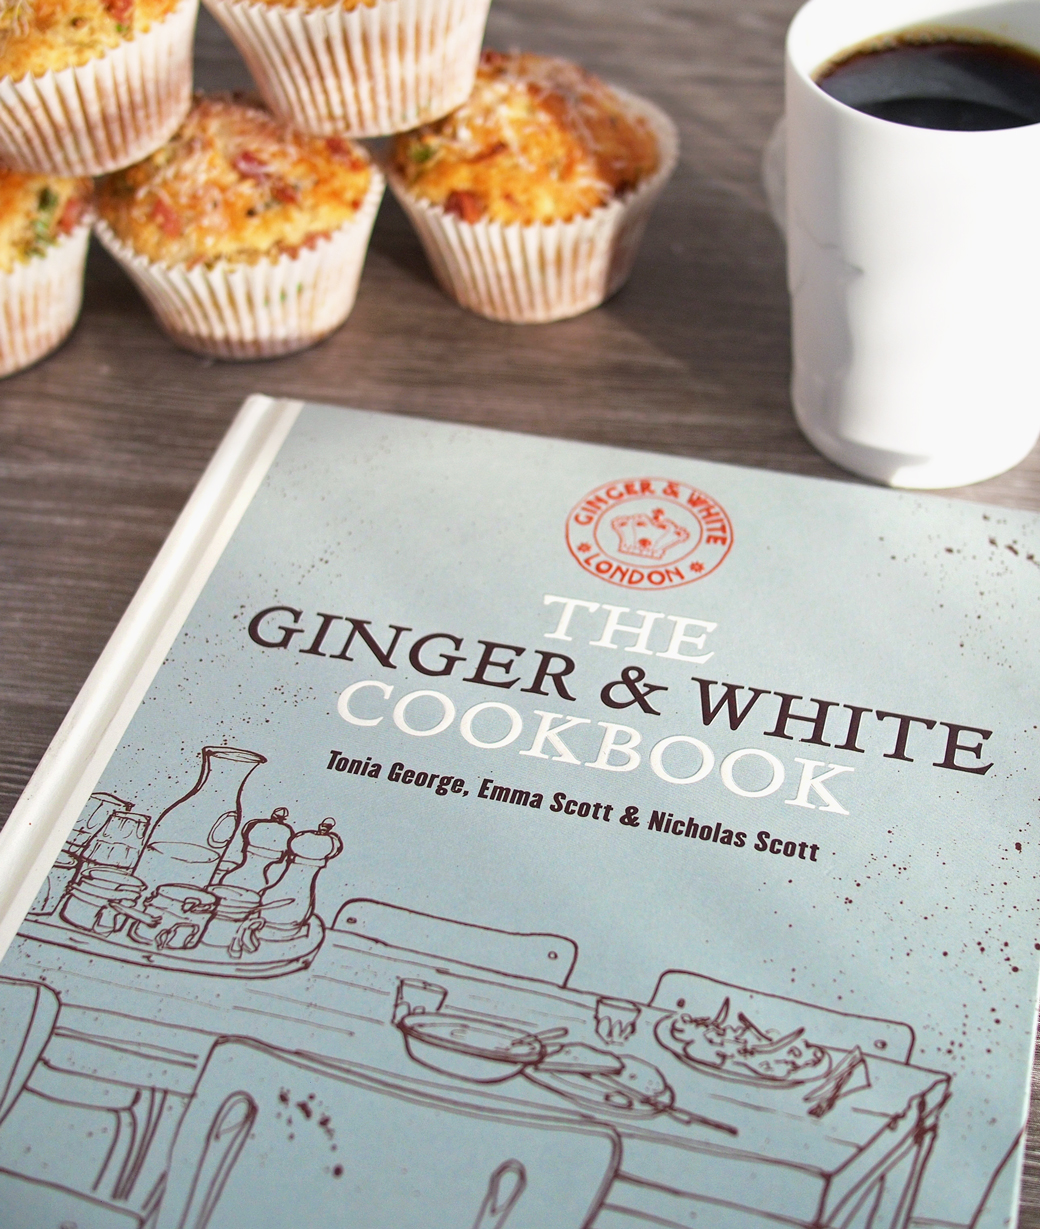 Ginger and White Cookbook